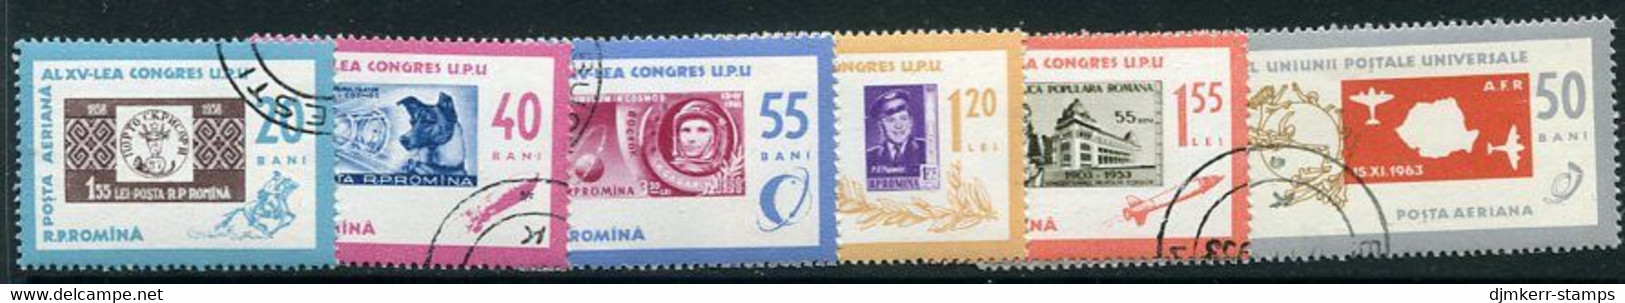 ROMANIA 1963 Stamp Day: World Postal Congress Used.  Michel 2189-94 - Used Stamps